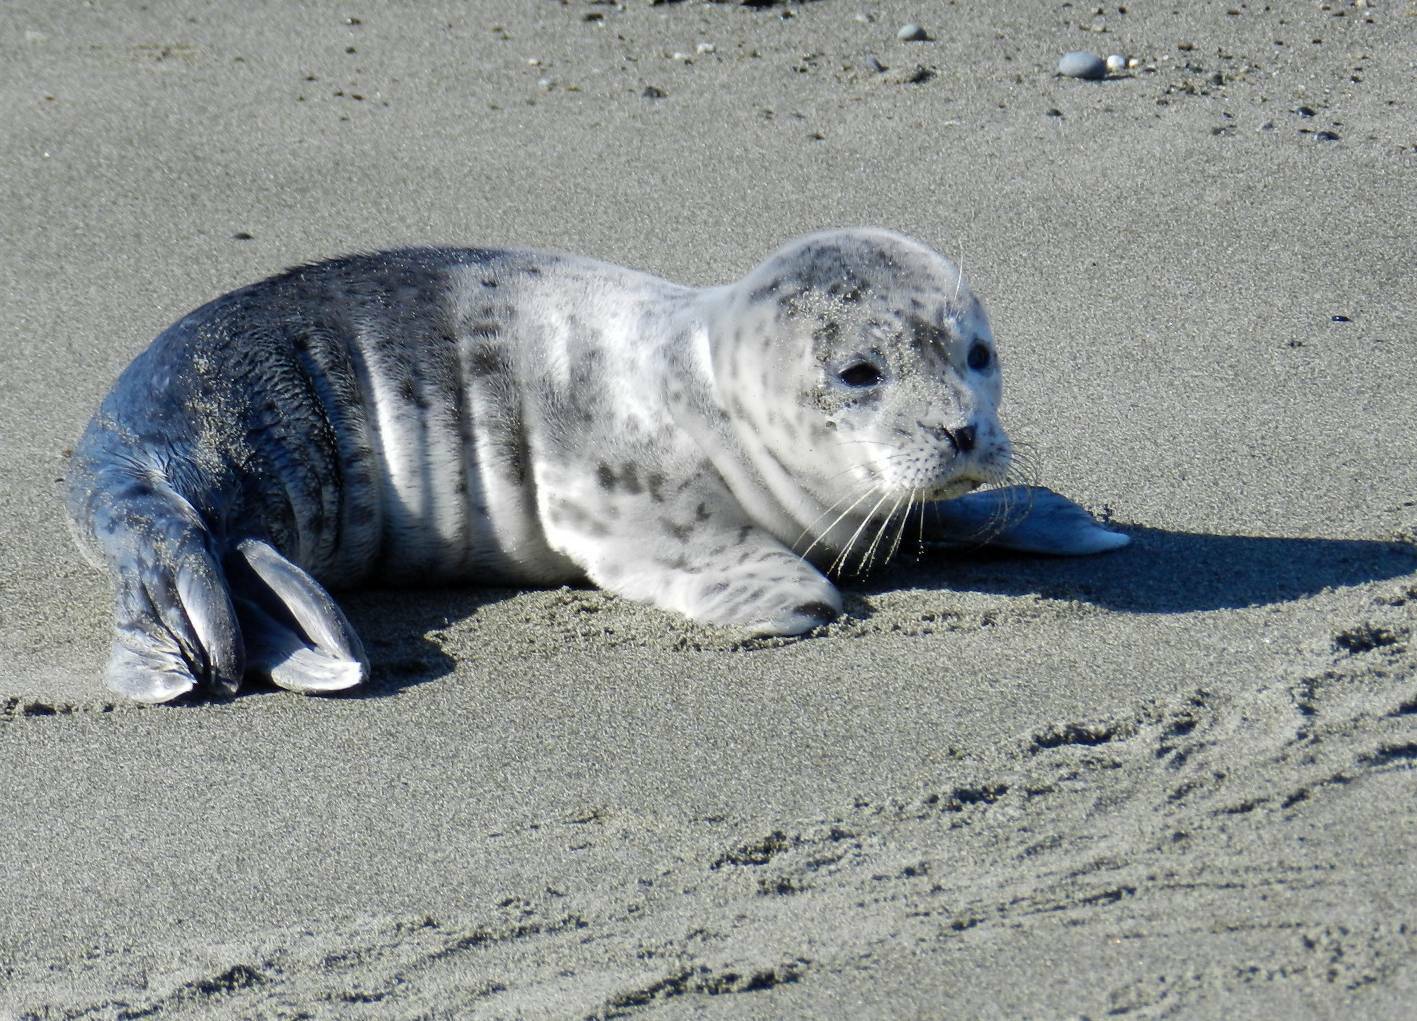 A seal pup on the beach. (Photo by Sandy Dubpernell)